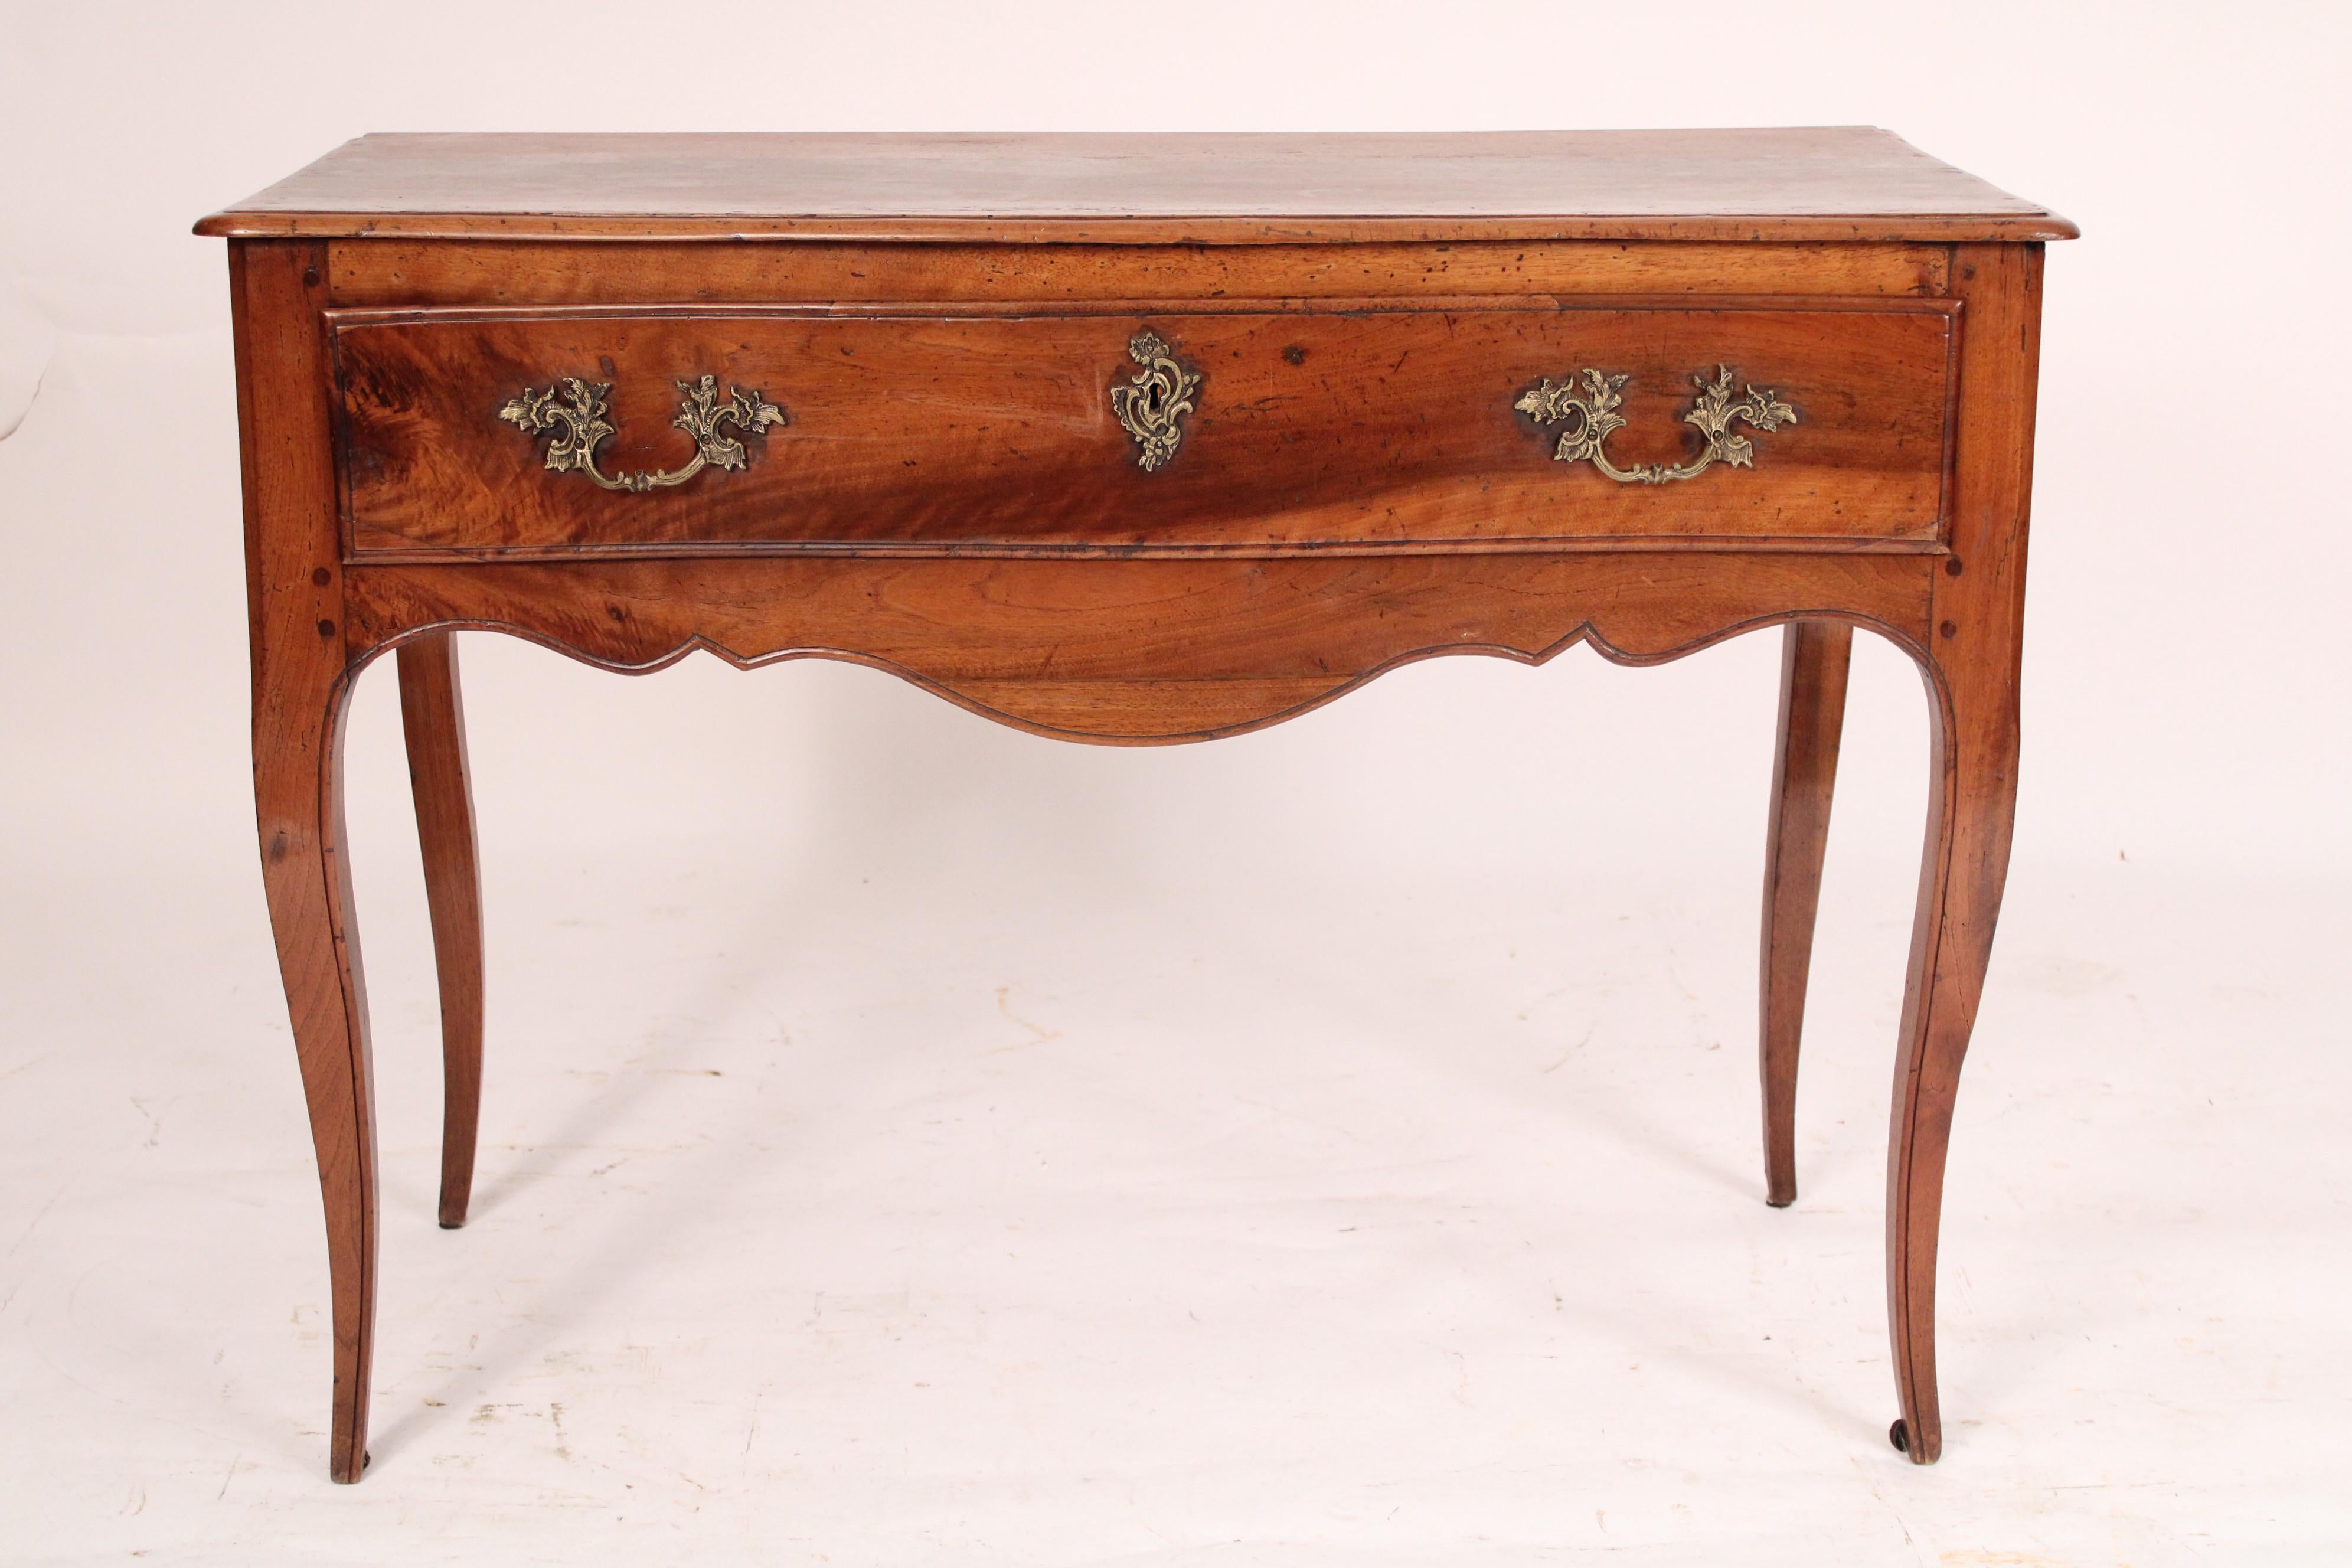 Antique Louis XV style provincial walnut console table, 19th century. The top with a serpentine shaped front molded front and side edges, a serpentine shaped drawer, a shaped apron, resting on cabriole legs. Hand dove tailed
drawer construction.